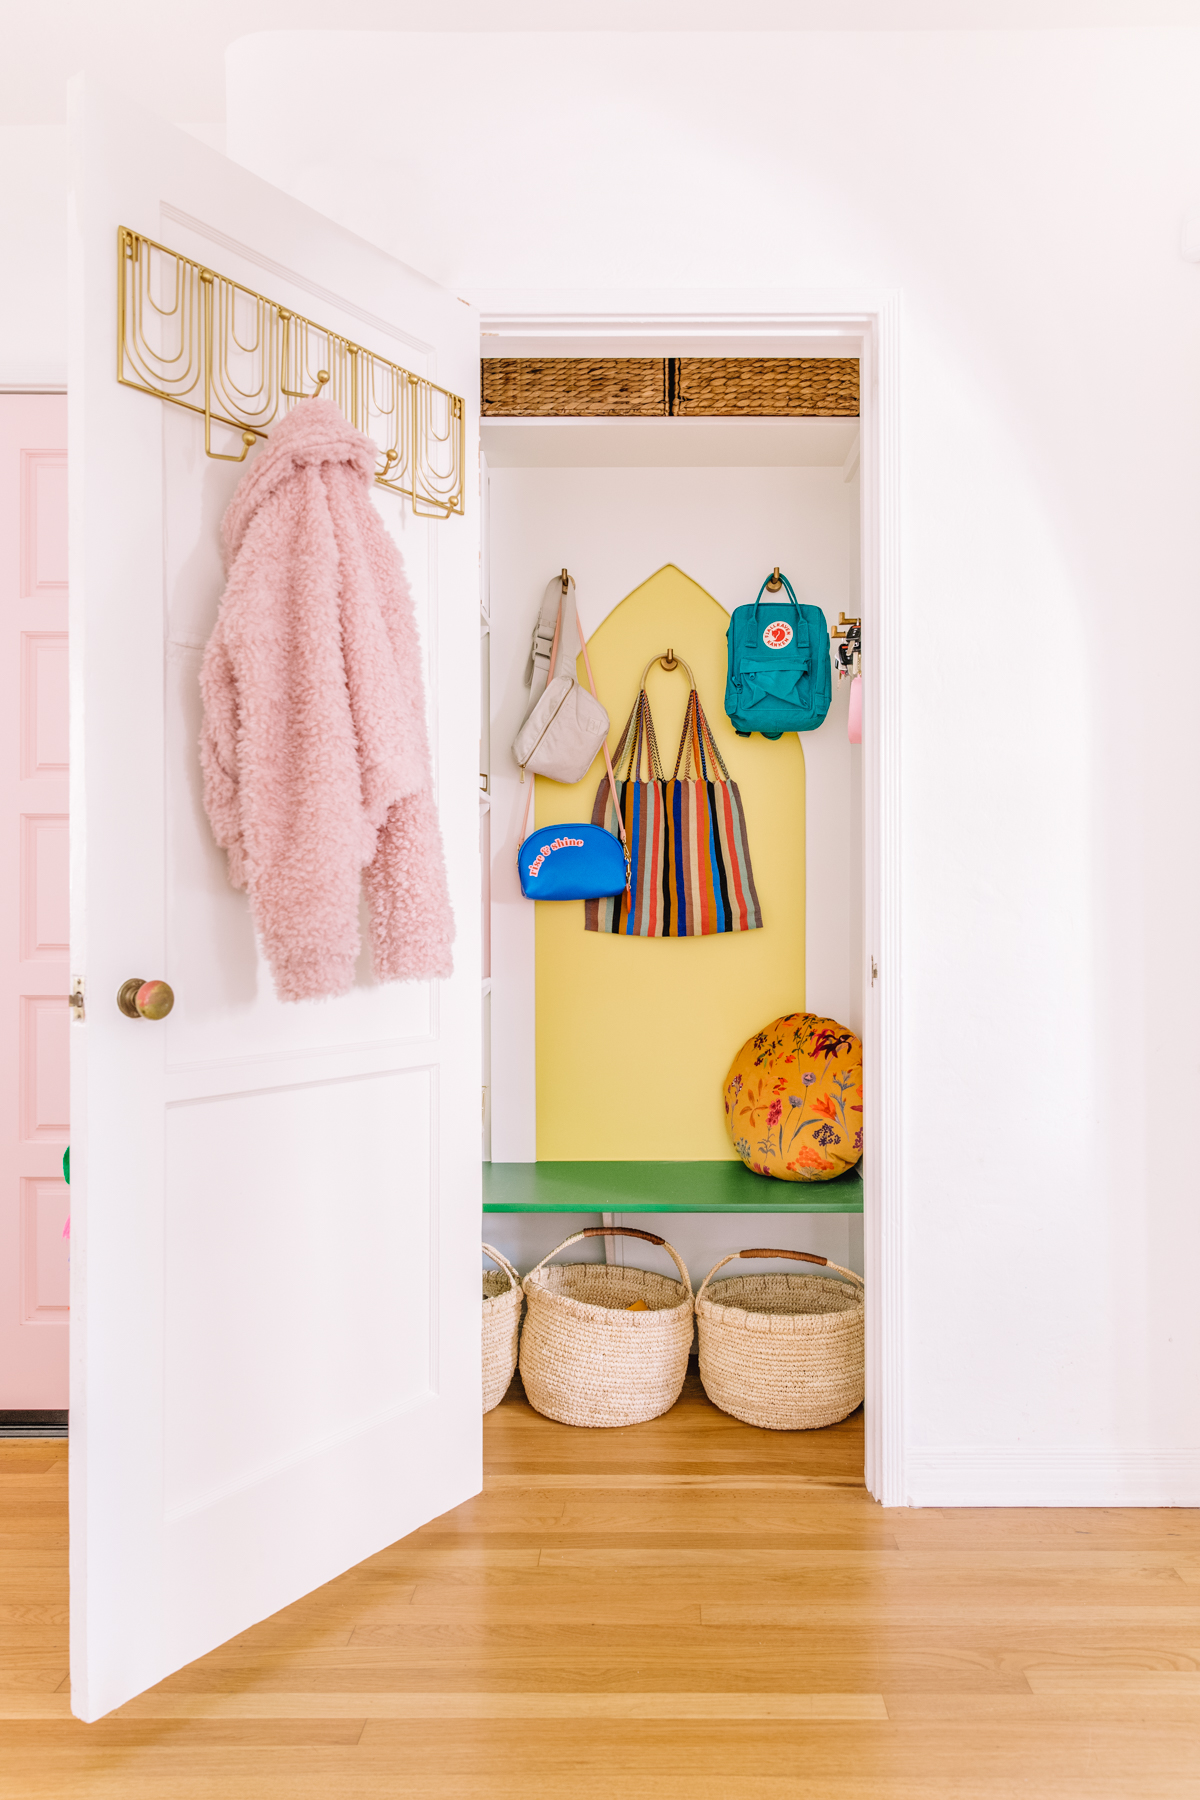 https://studiodiy.com/wp-content/uploads/2019/10/Functional-and-Colorful-Entry-Closet-Ideas-18.jpg